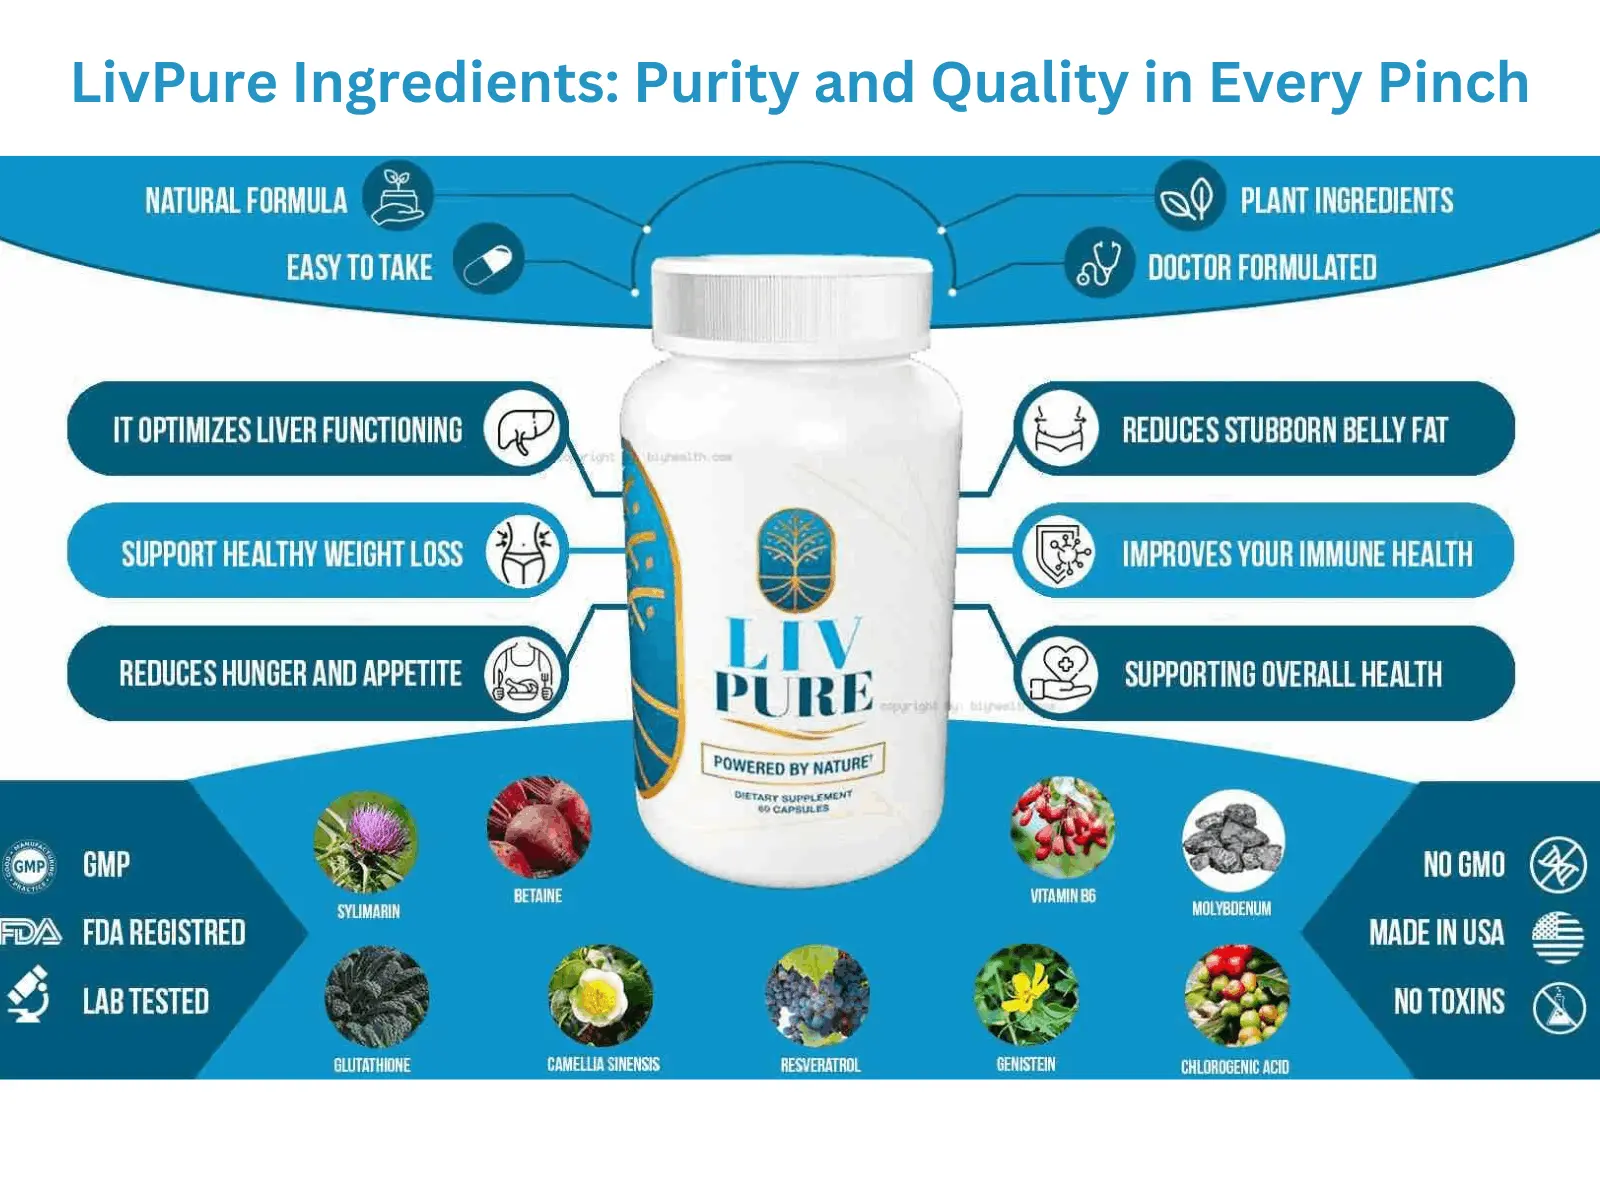 LivPure Ingredients Purity and Quality in Every Pinch